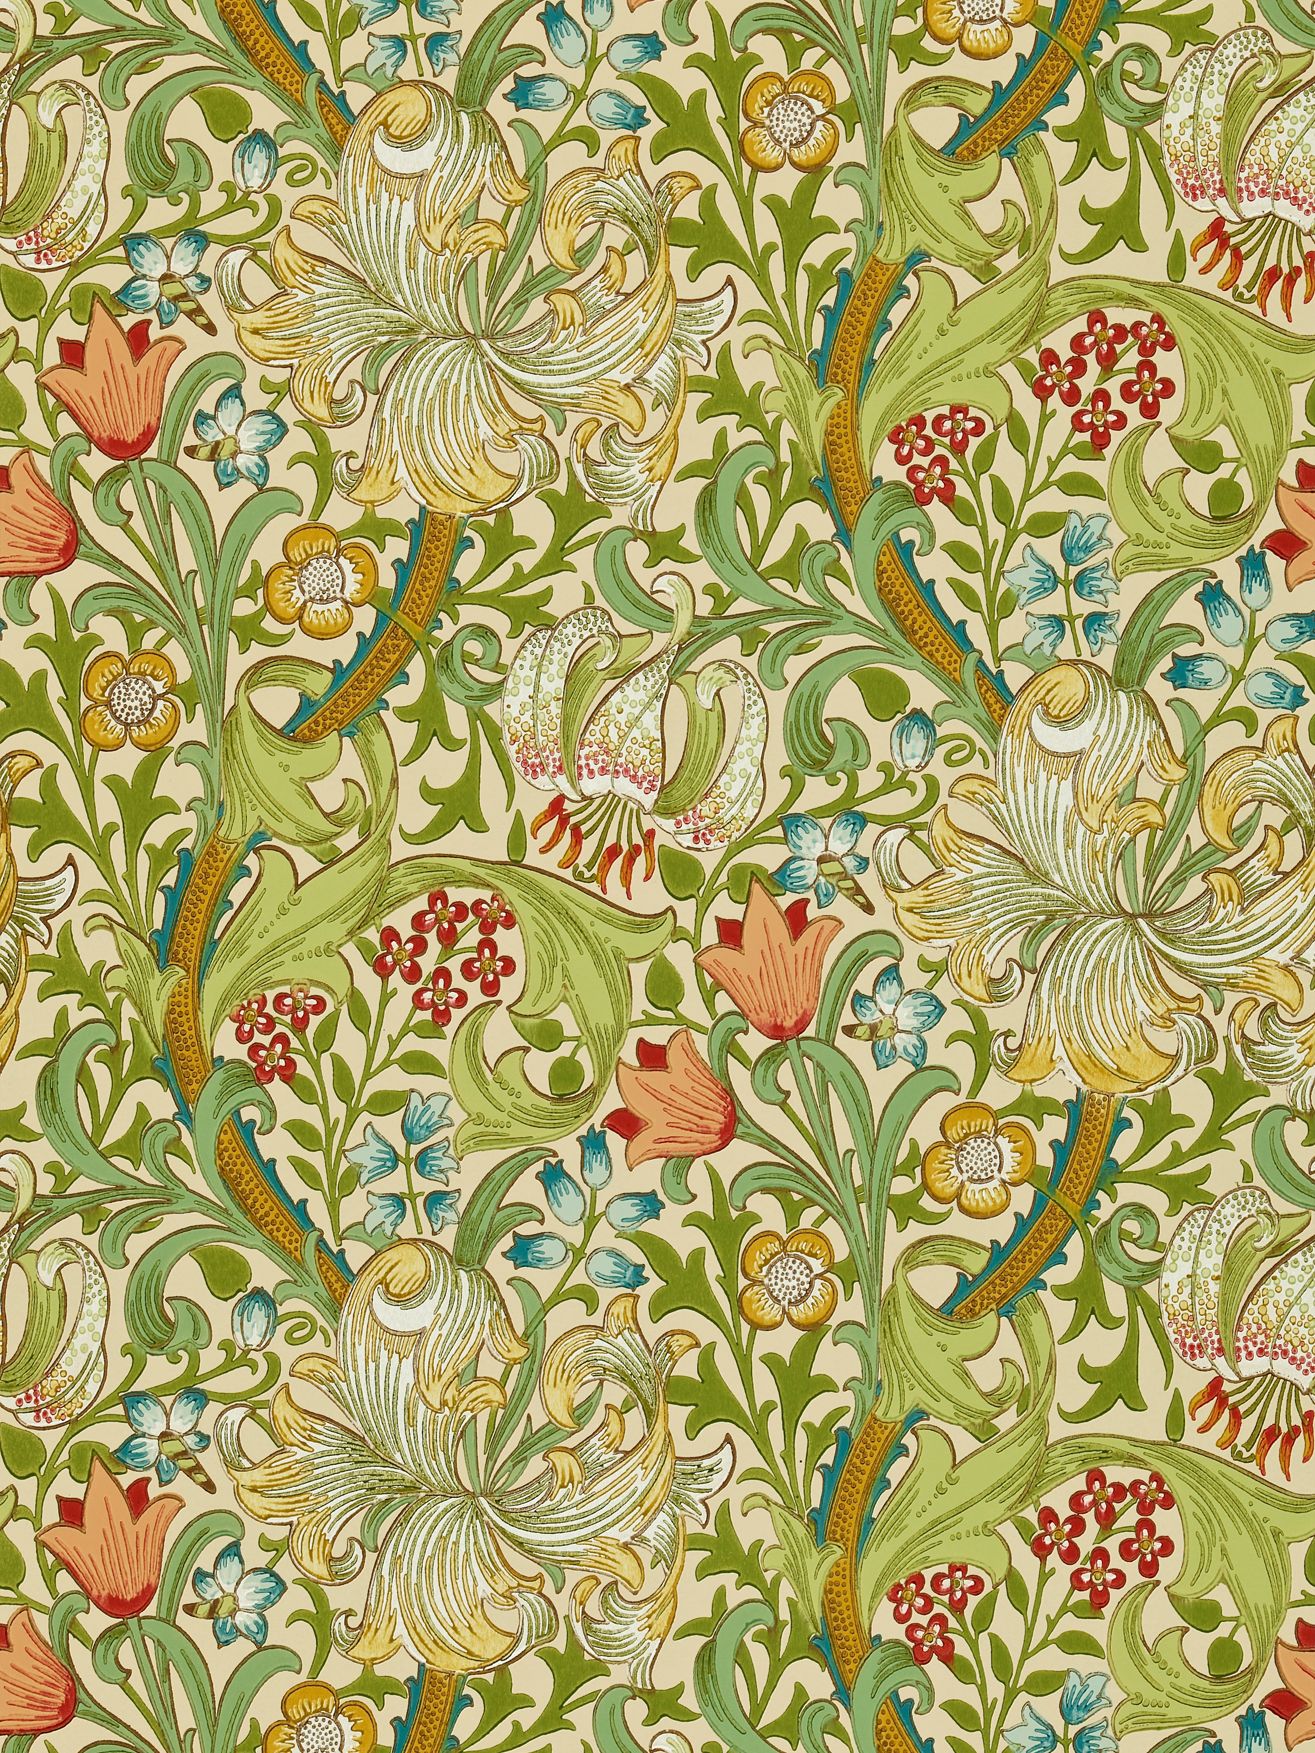 Morris & Co. Golden Lily Wallpaper, Pale Biscuit, DMCW210431